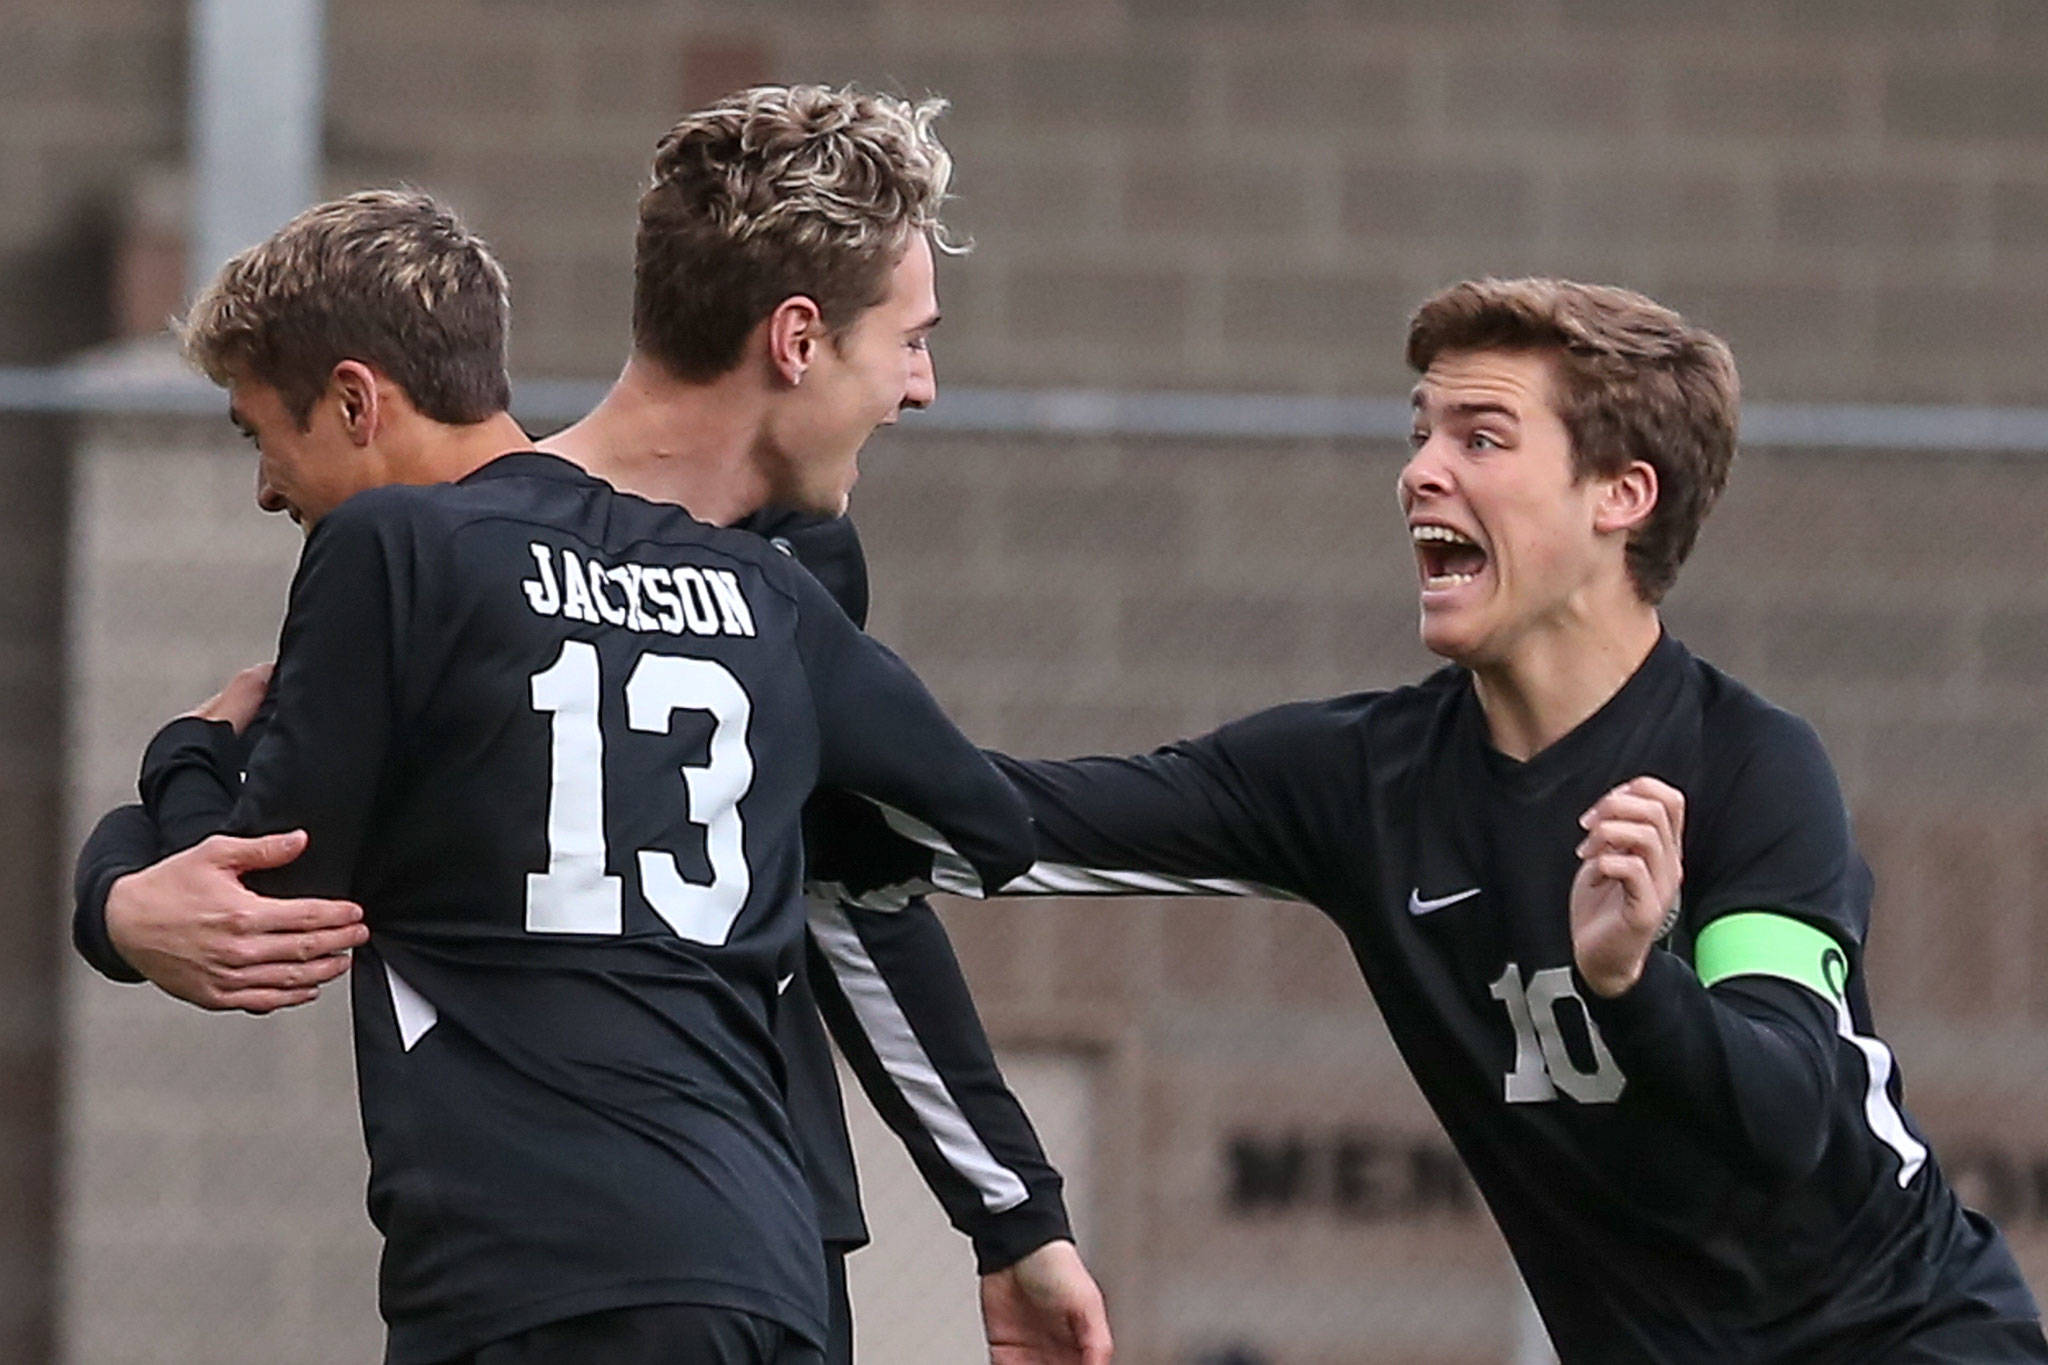 Jackson’s Adan Fernandez (left) and Jacob Williams (right) congratulate Vincenzo D’Onofrio (center) on his goal against Federal Way during a 4A state soccer match on May 17, 2019, at Everett Memorial Stadium. The Timberwolves won 2-1. (Kevin Clark / The Herald)